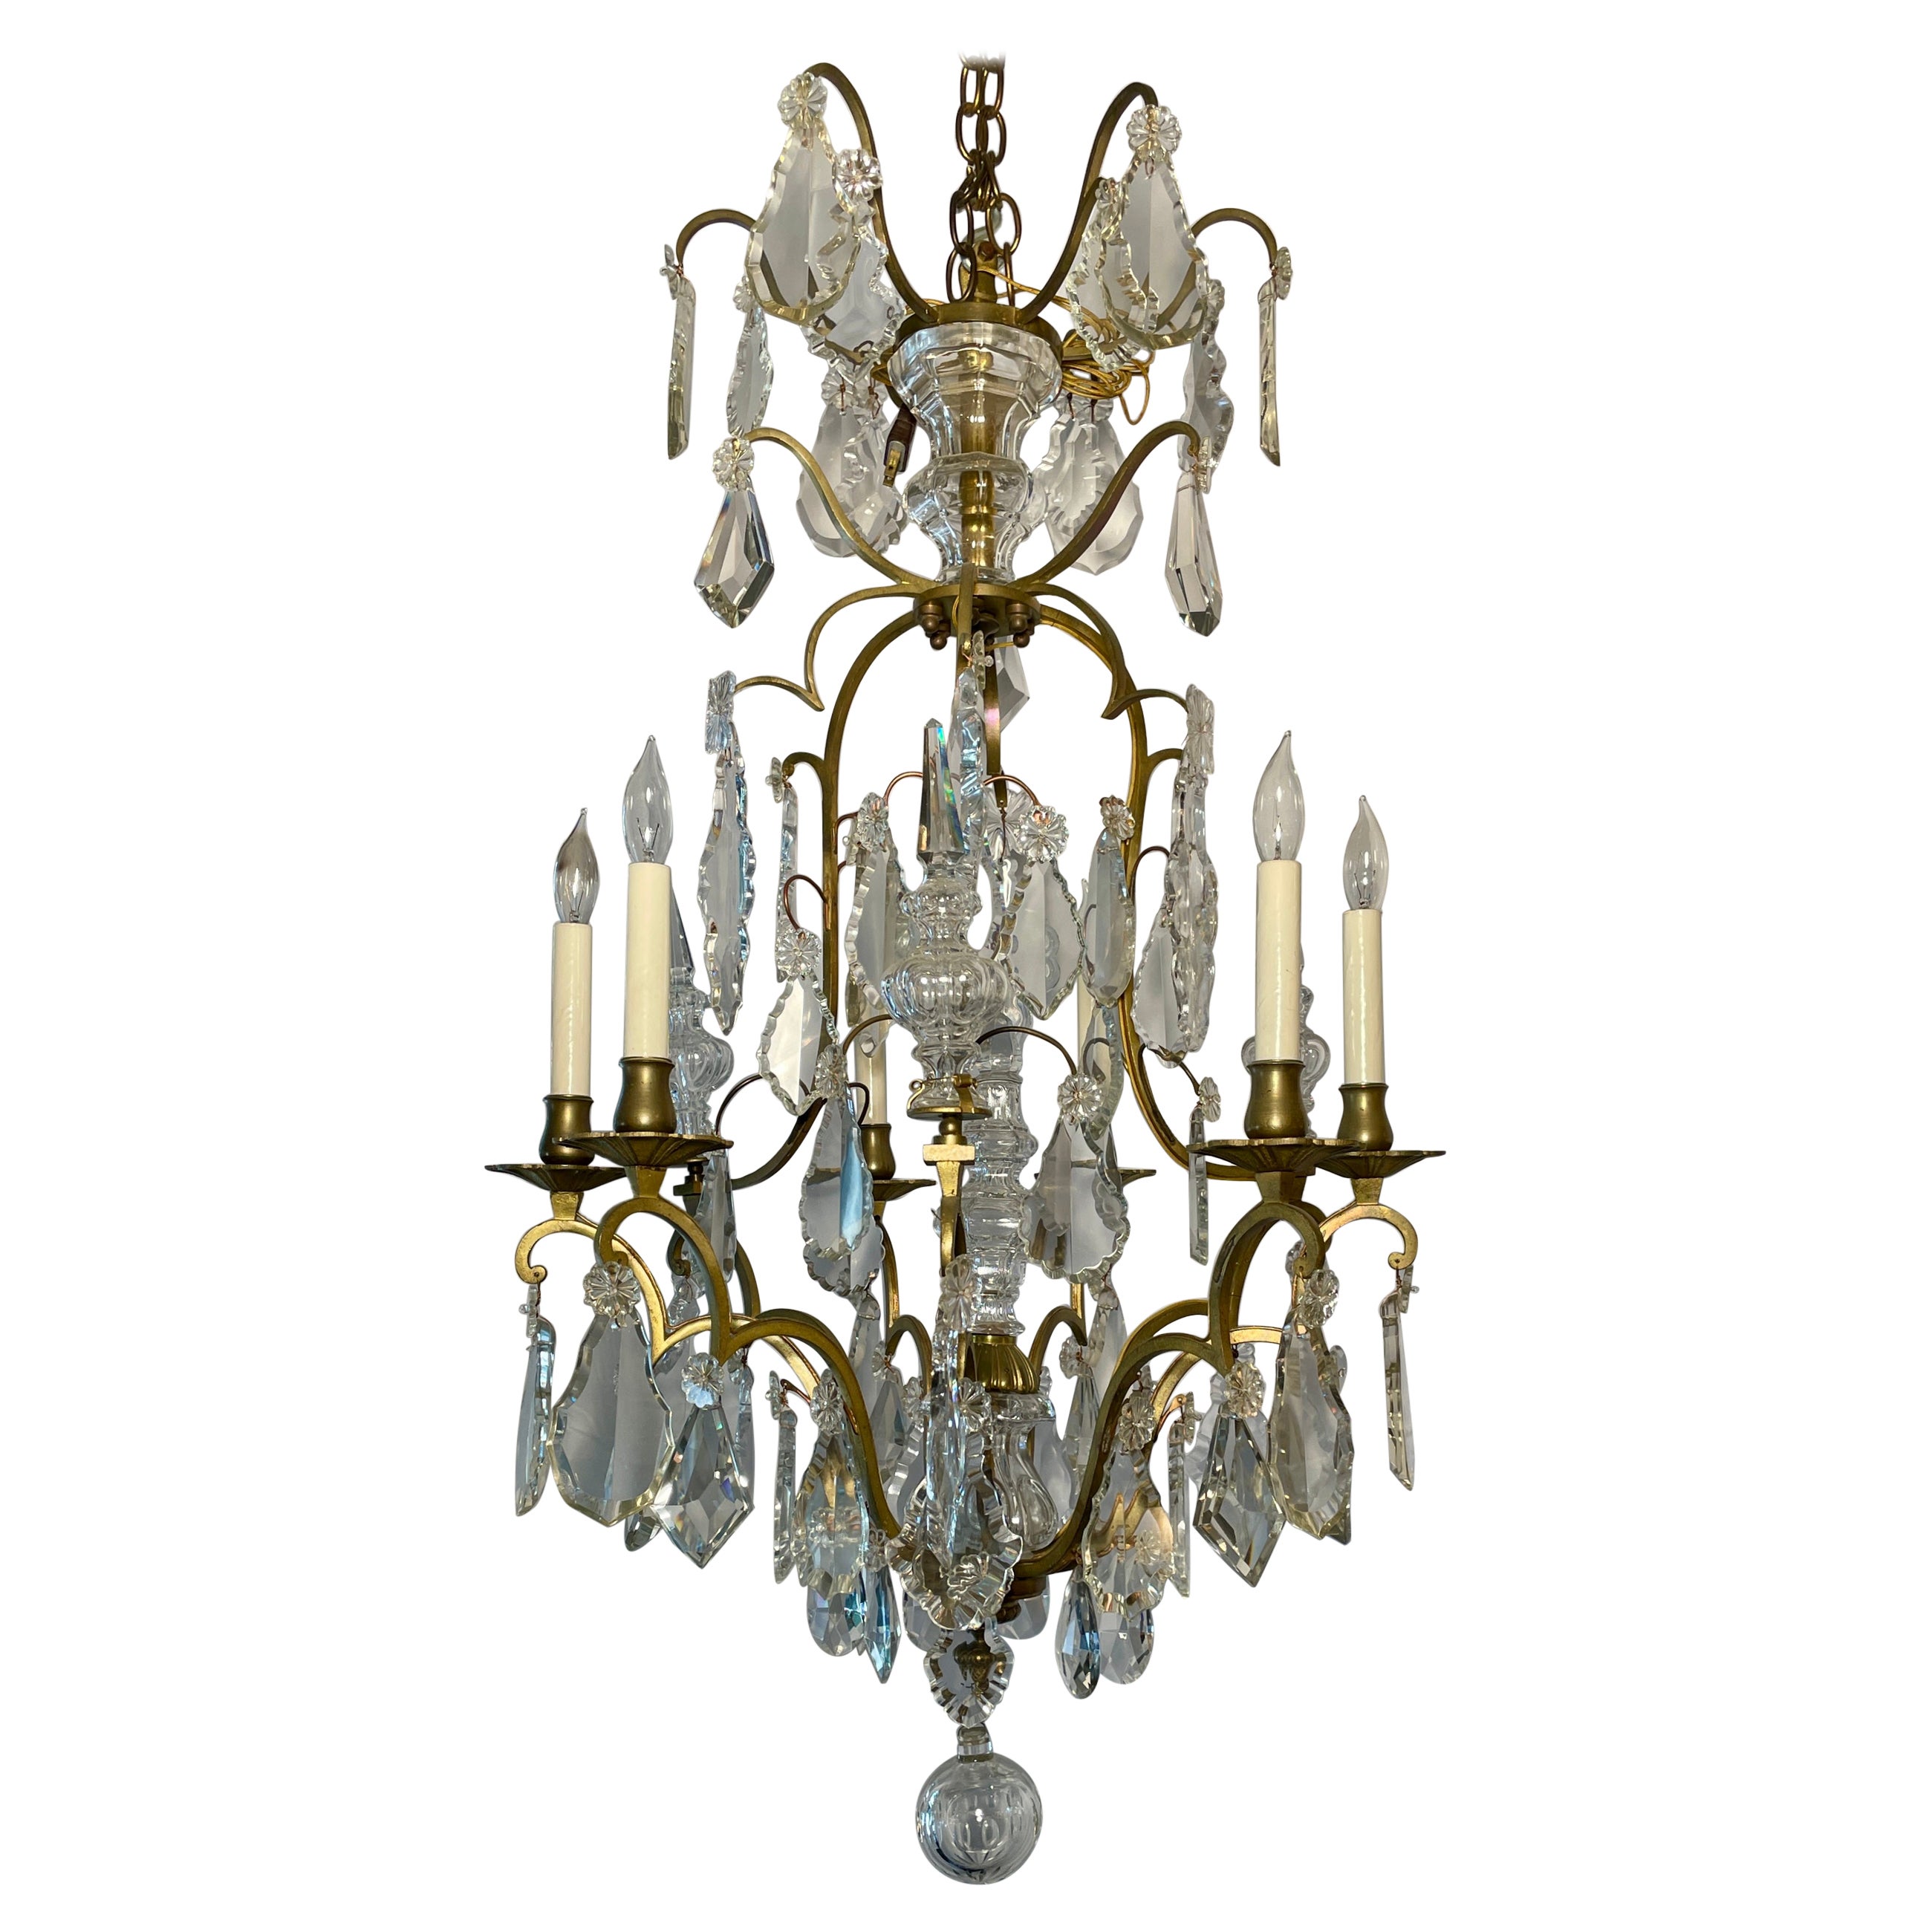 Antique French Baccarat Crystal and Bronze D' Ore Chandelier, circa 1880-1890